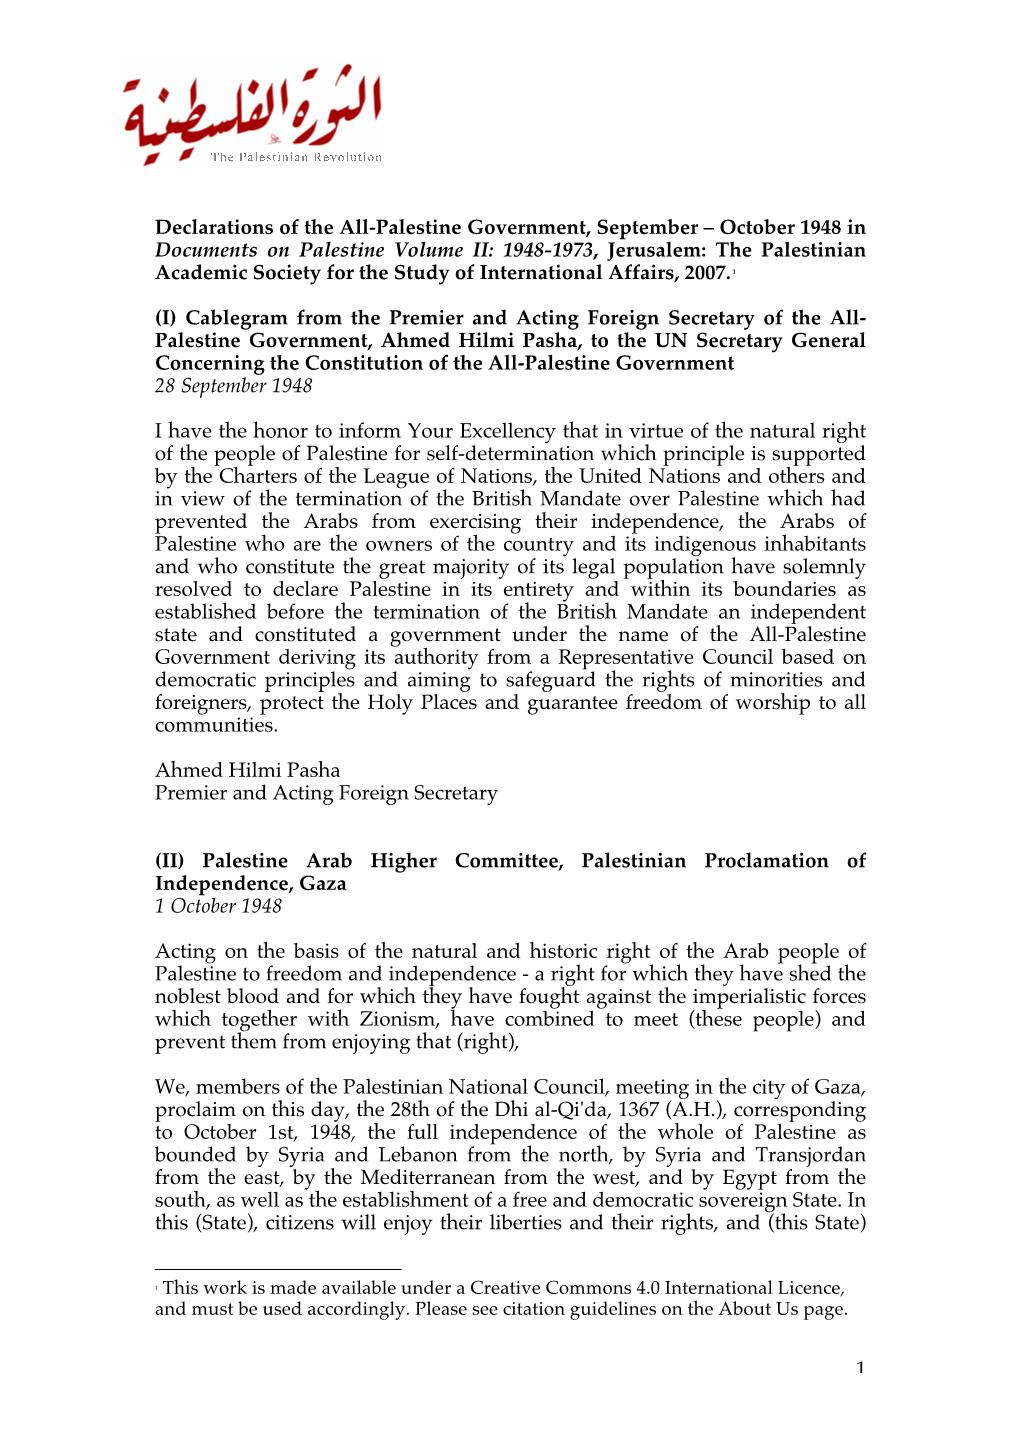 October 1948 in Documents on Palestine Volume II: 1948-1973, Jerusalem: the Palestinian Academic Society for the Study of International Affairs, 2007